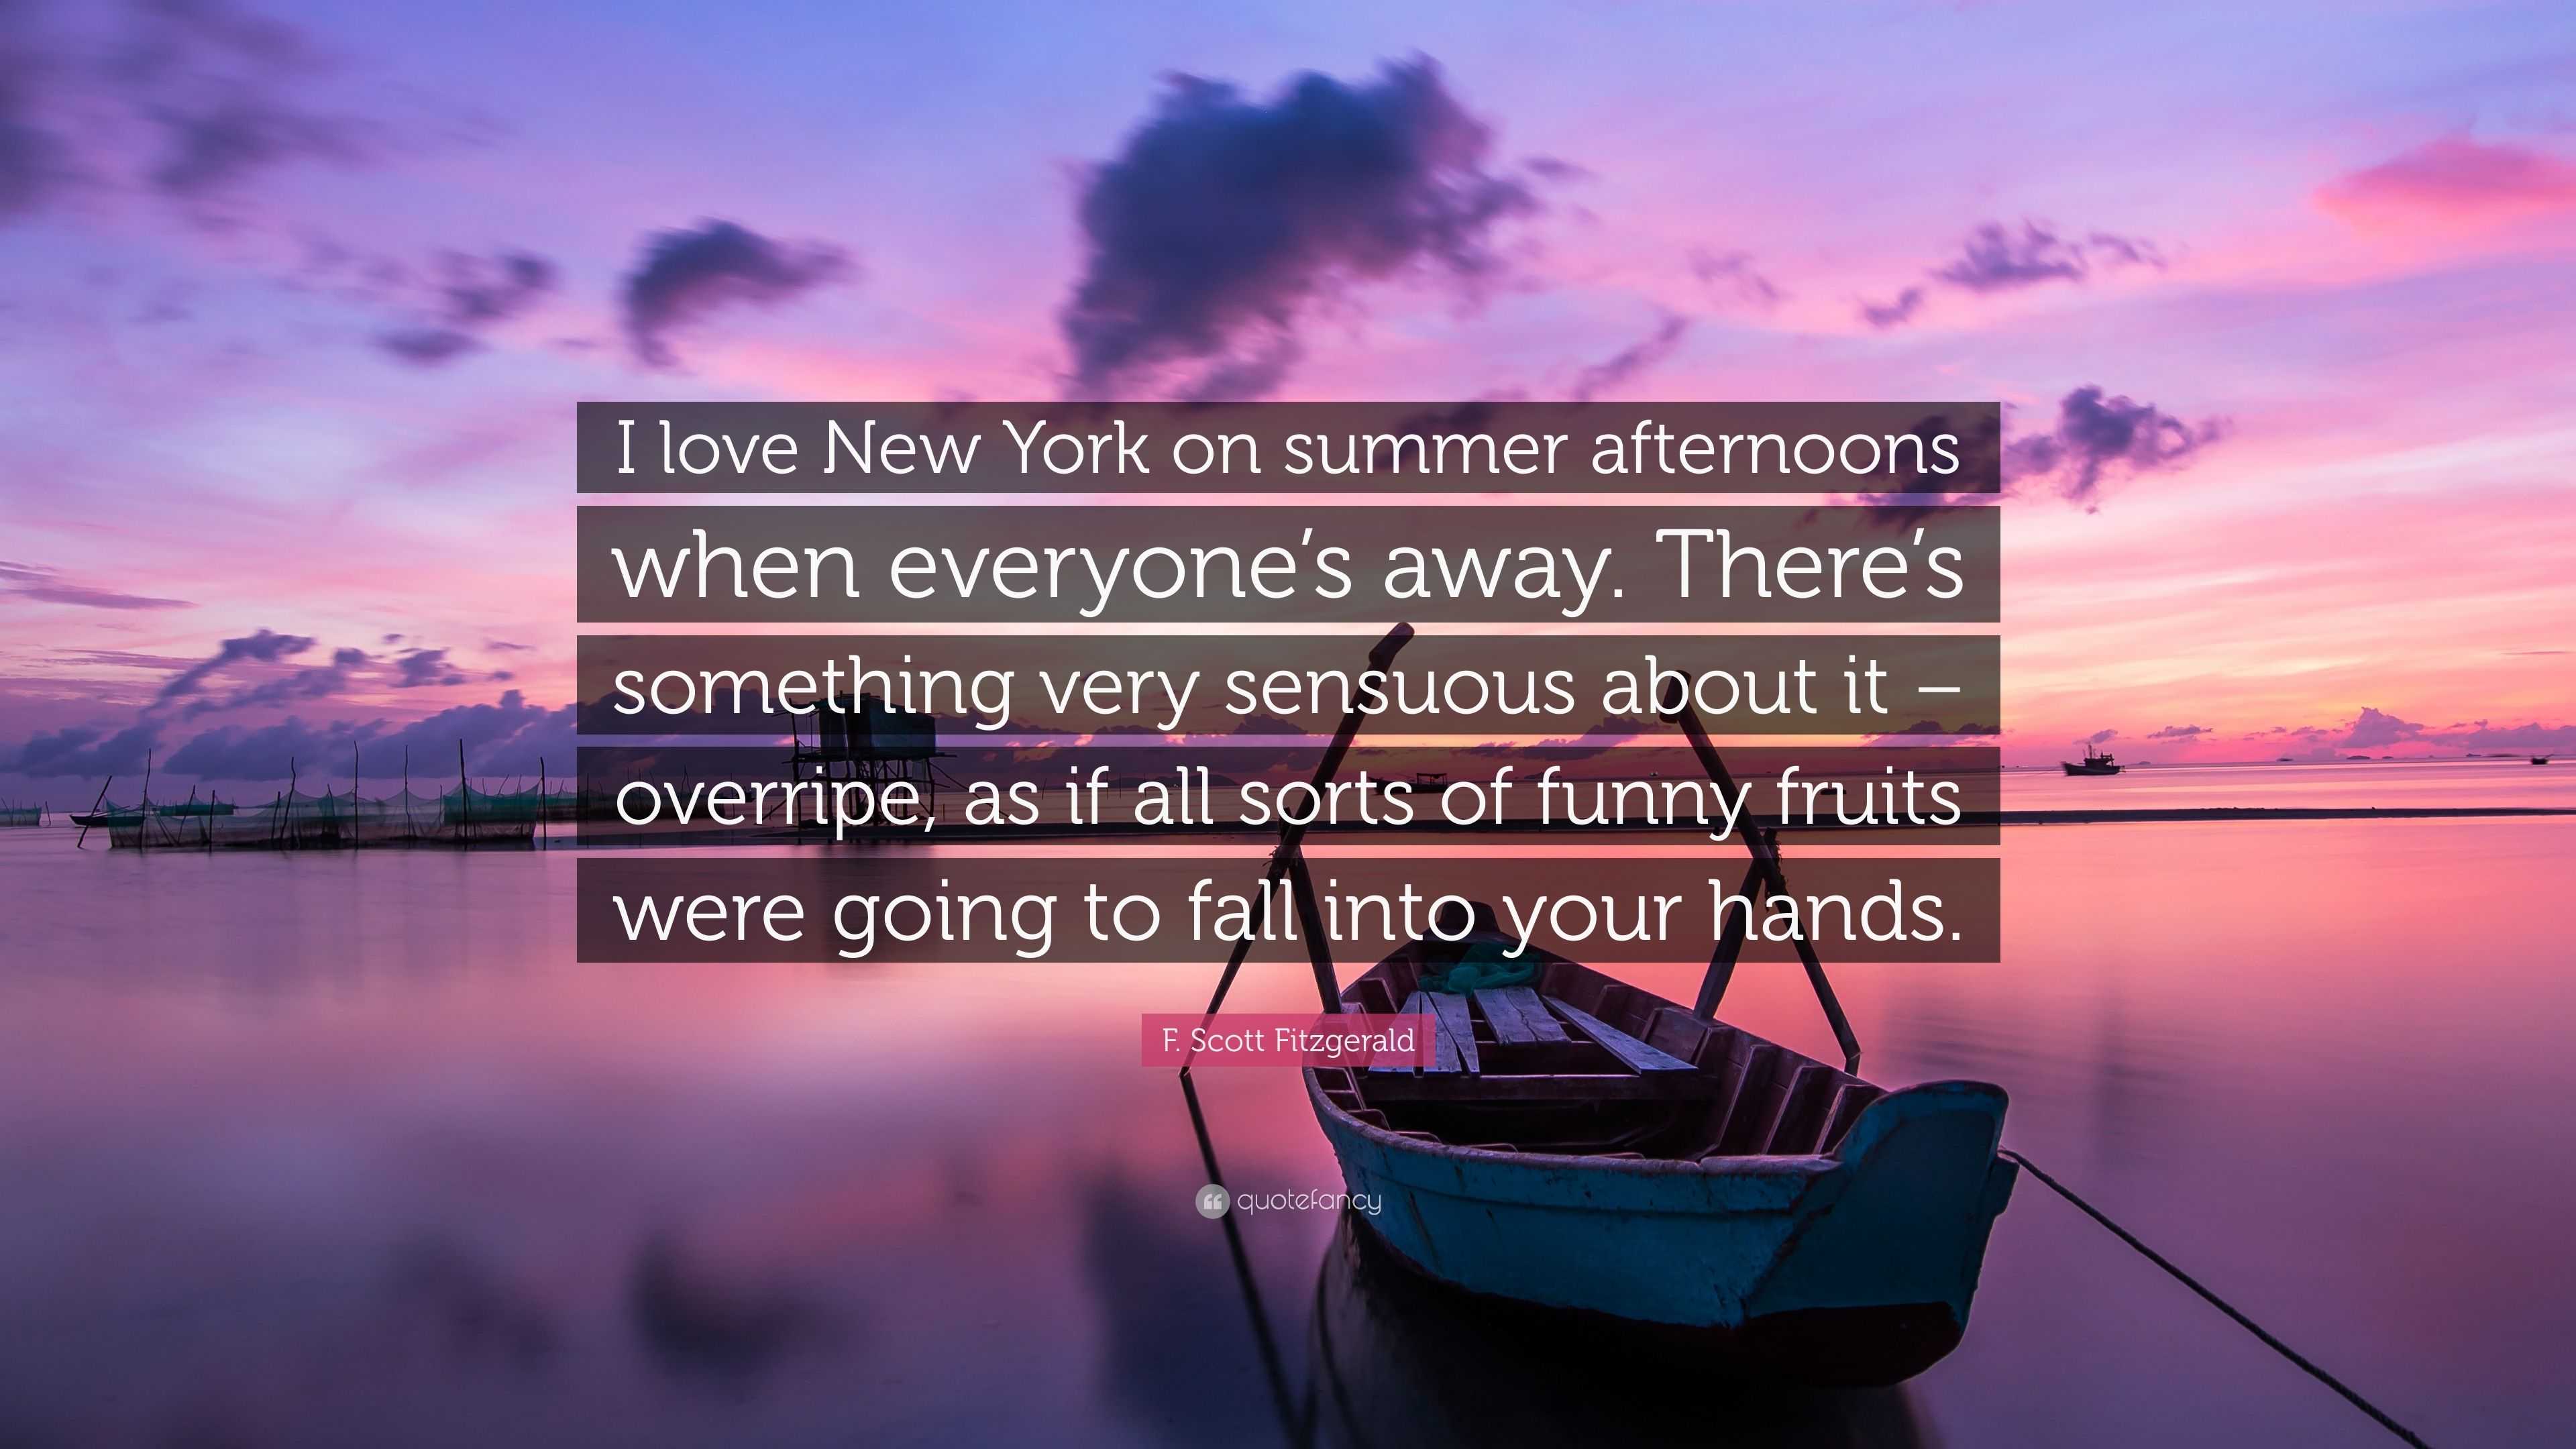 F. Scott Fitzgerald Quote: “I love New York on summer afternoons when